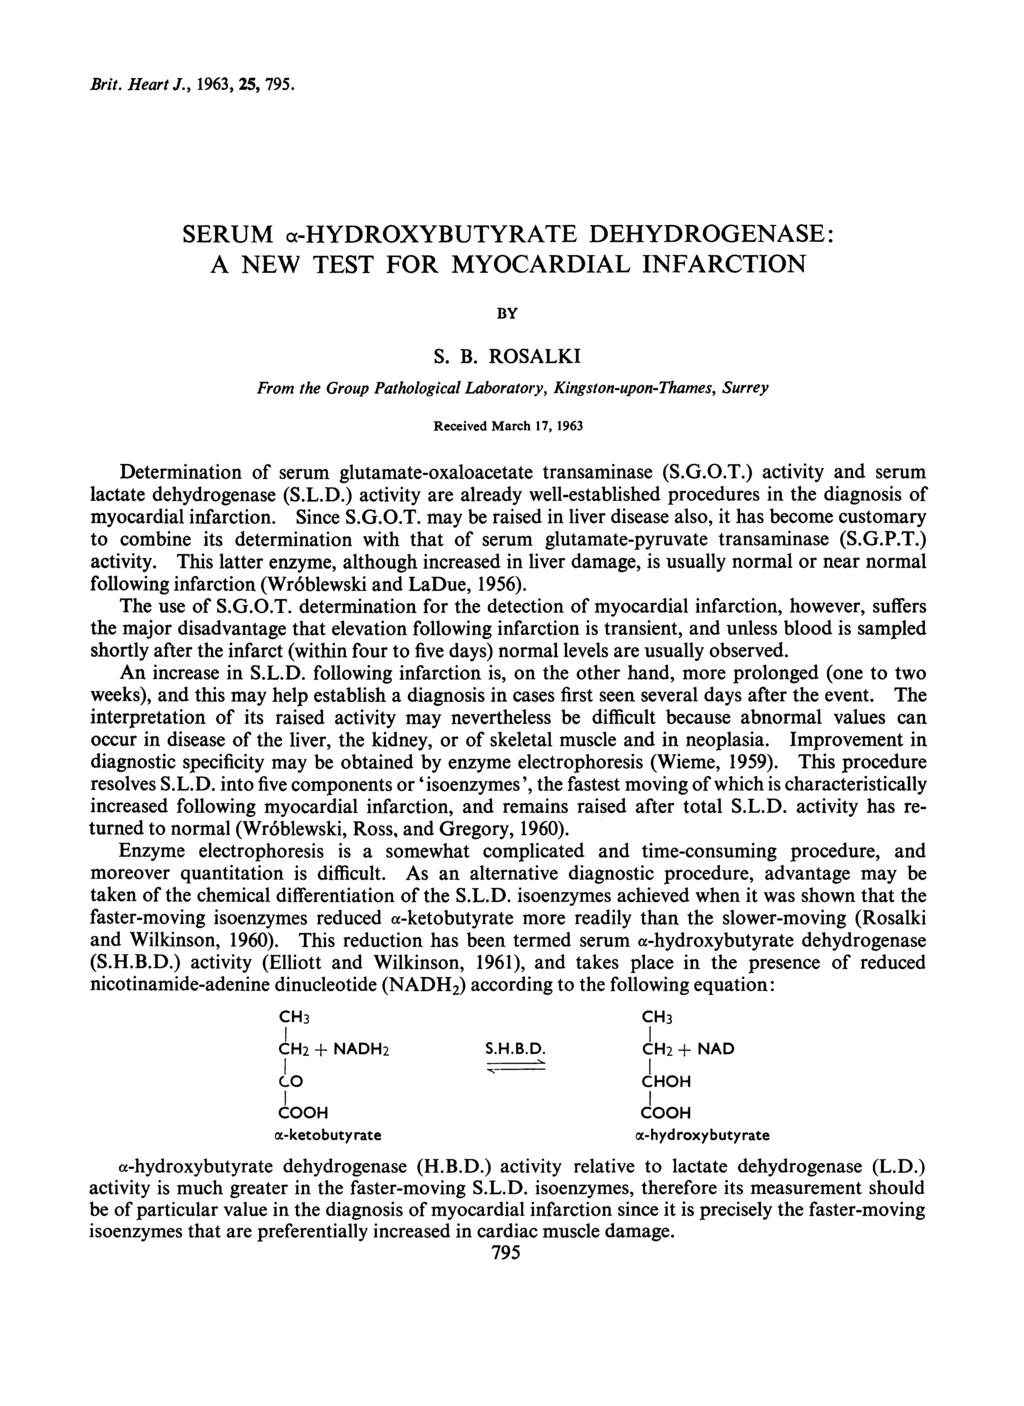 Brit. Heart J., 1963, 25, 795. SERUM a-hydroxybutyrate DEHYDROGENASE: A NEW TEST FOR MYOCARDIAL INFARCTION BY